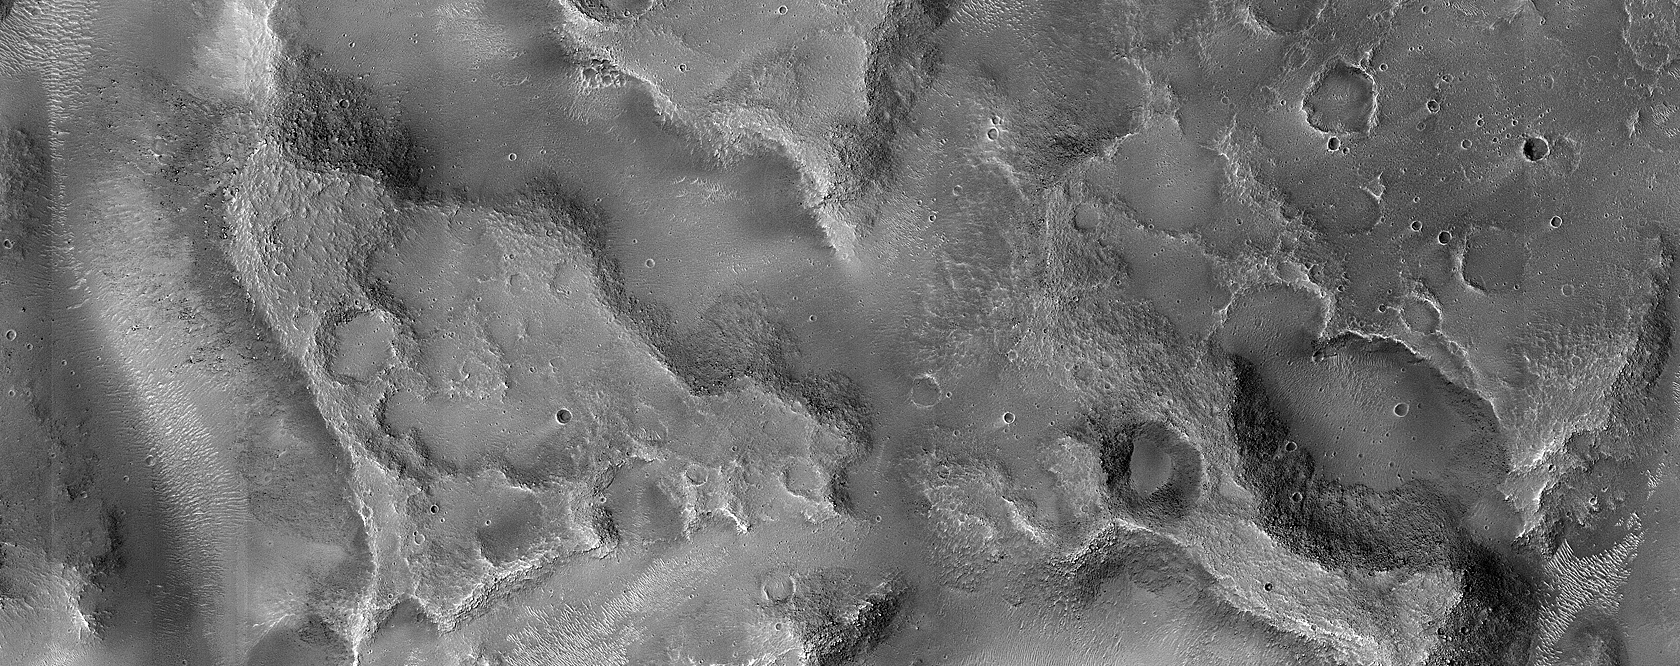 Fractured Blocks on a Crater Floor